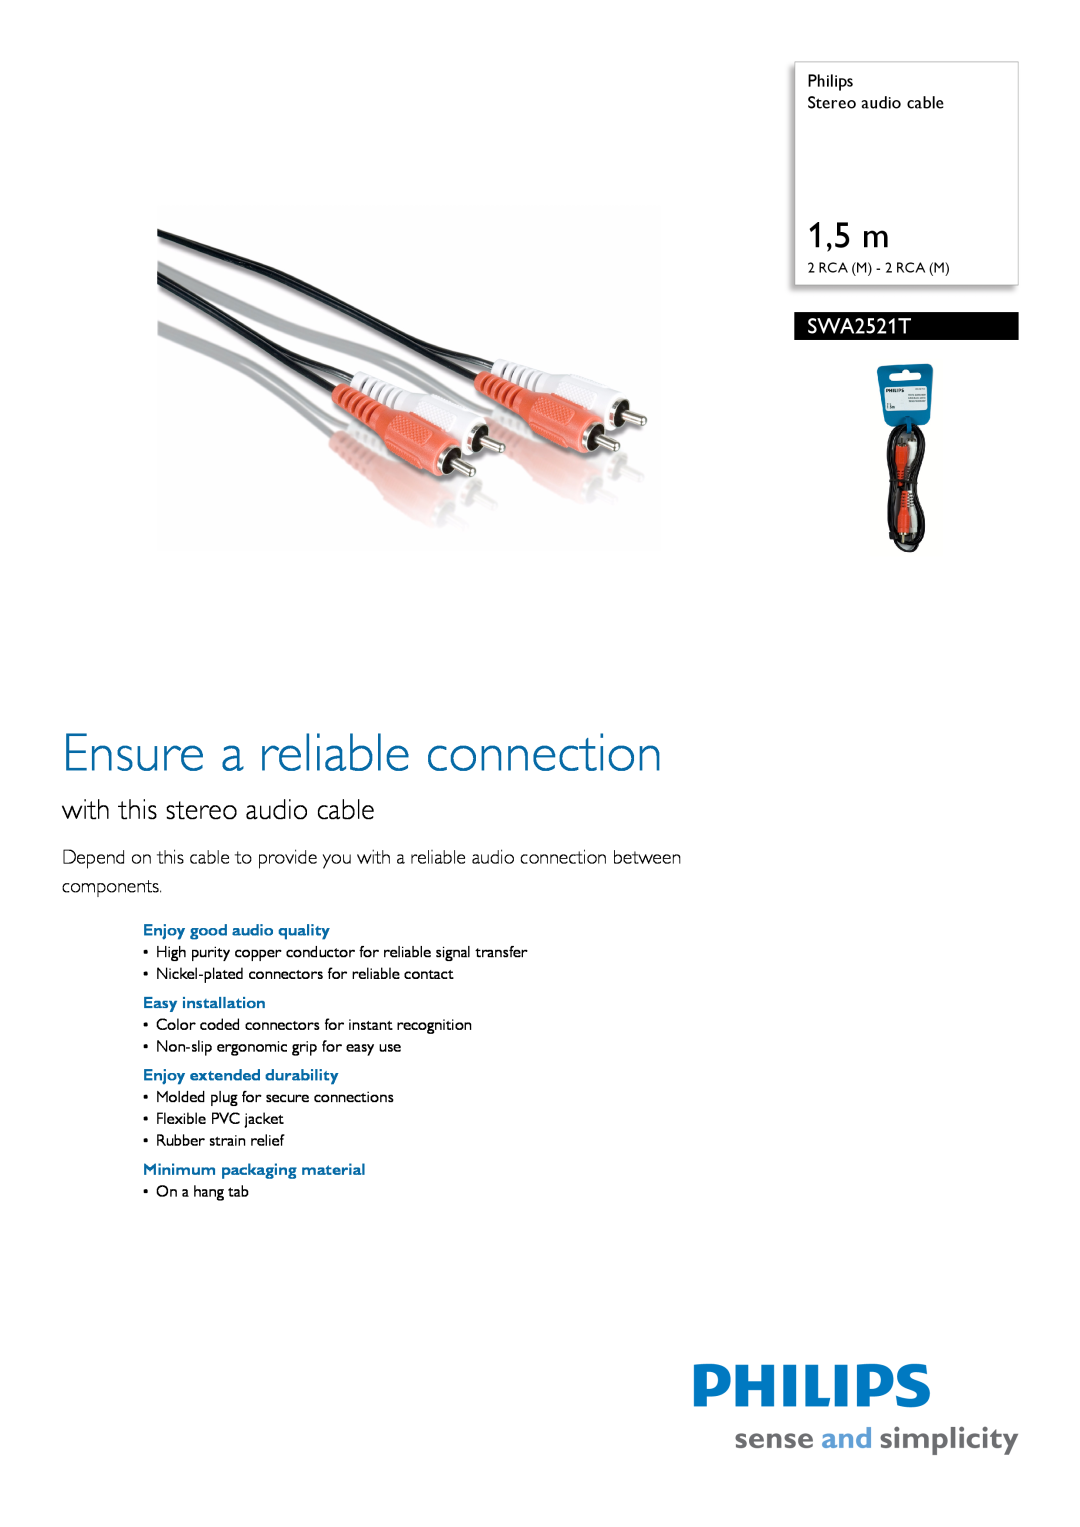 Philips SWA2521T manual Philips Stereo audio cable, Ensure a reliable connection, 1,5 m, with this stereo audio cable 